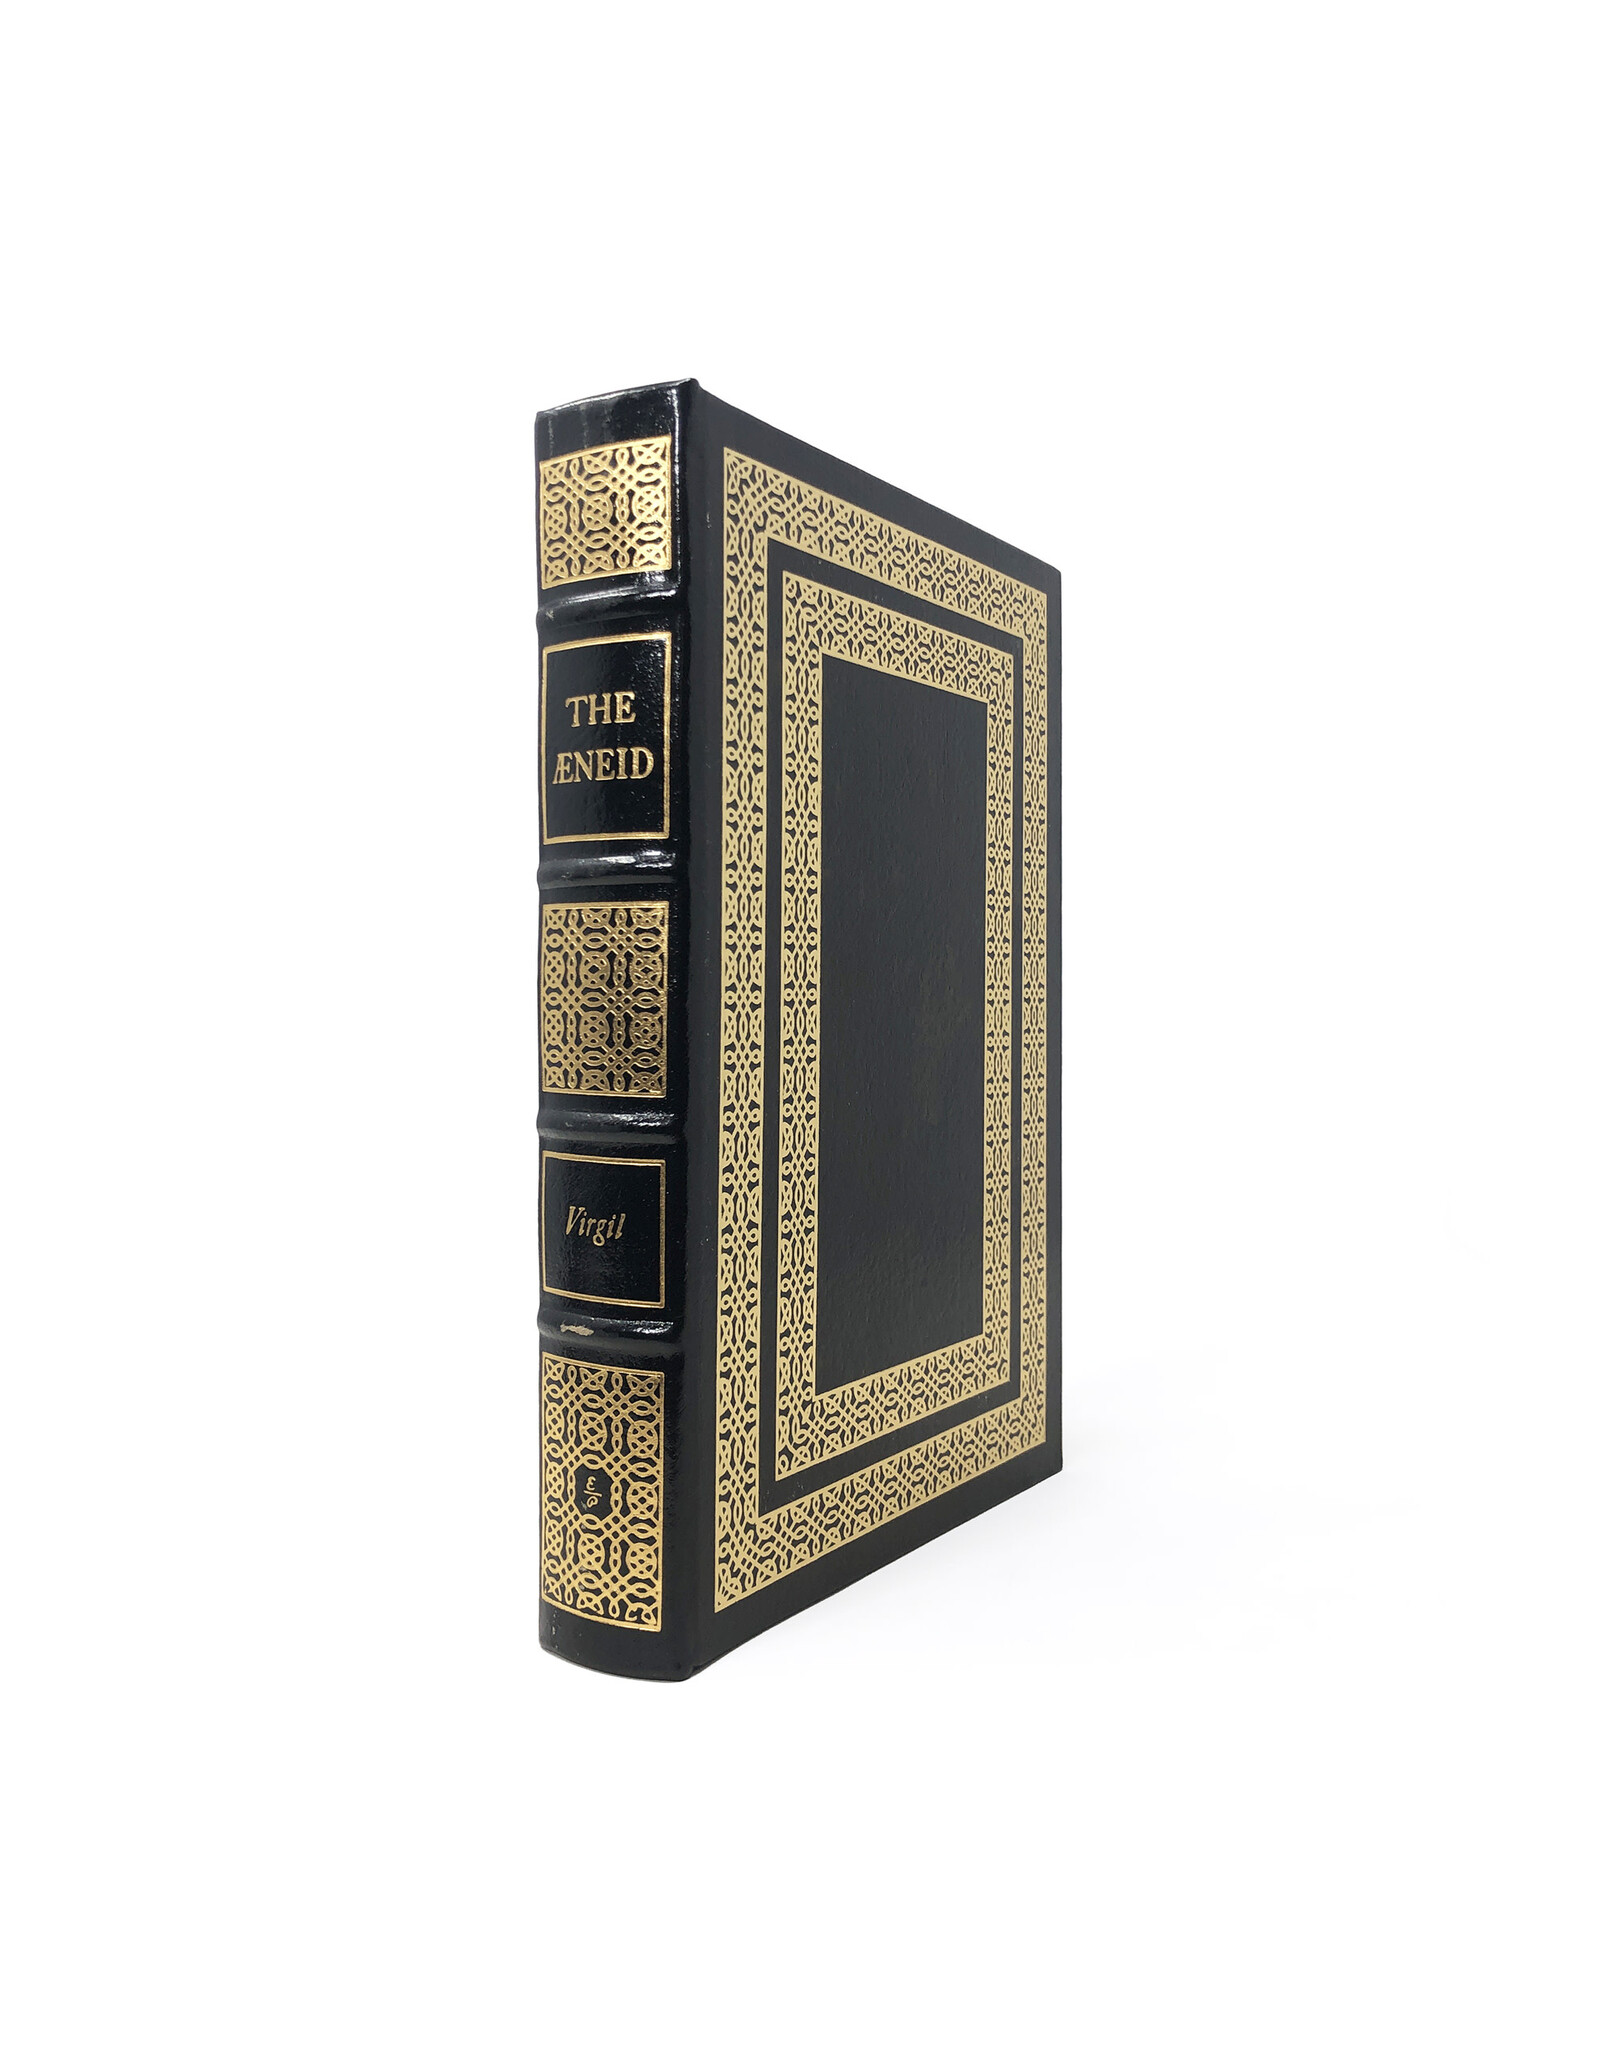 Easton Press Æneid 100 Greatest Books Ever Written Genuine Leather Collector's Edition